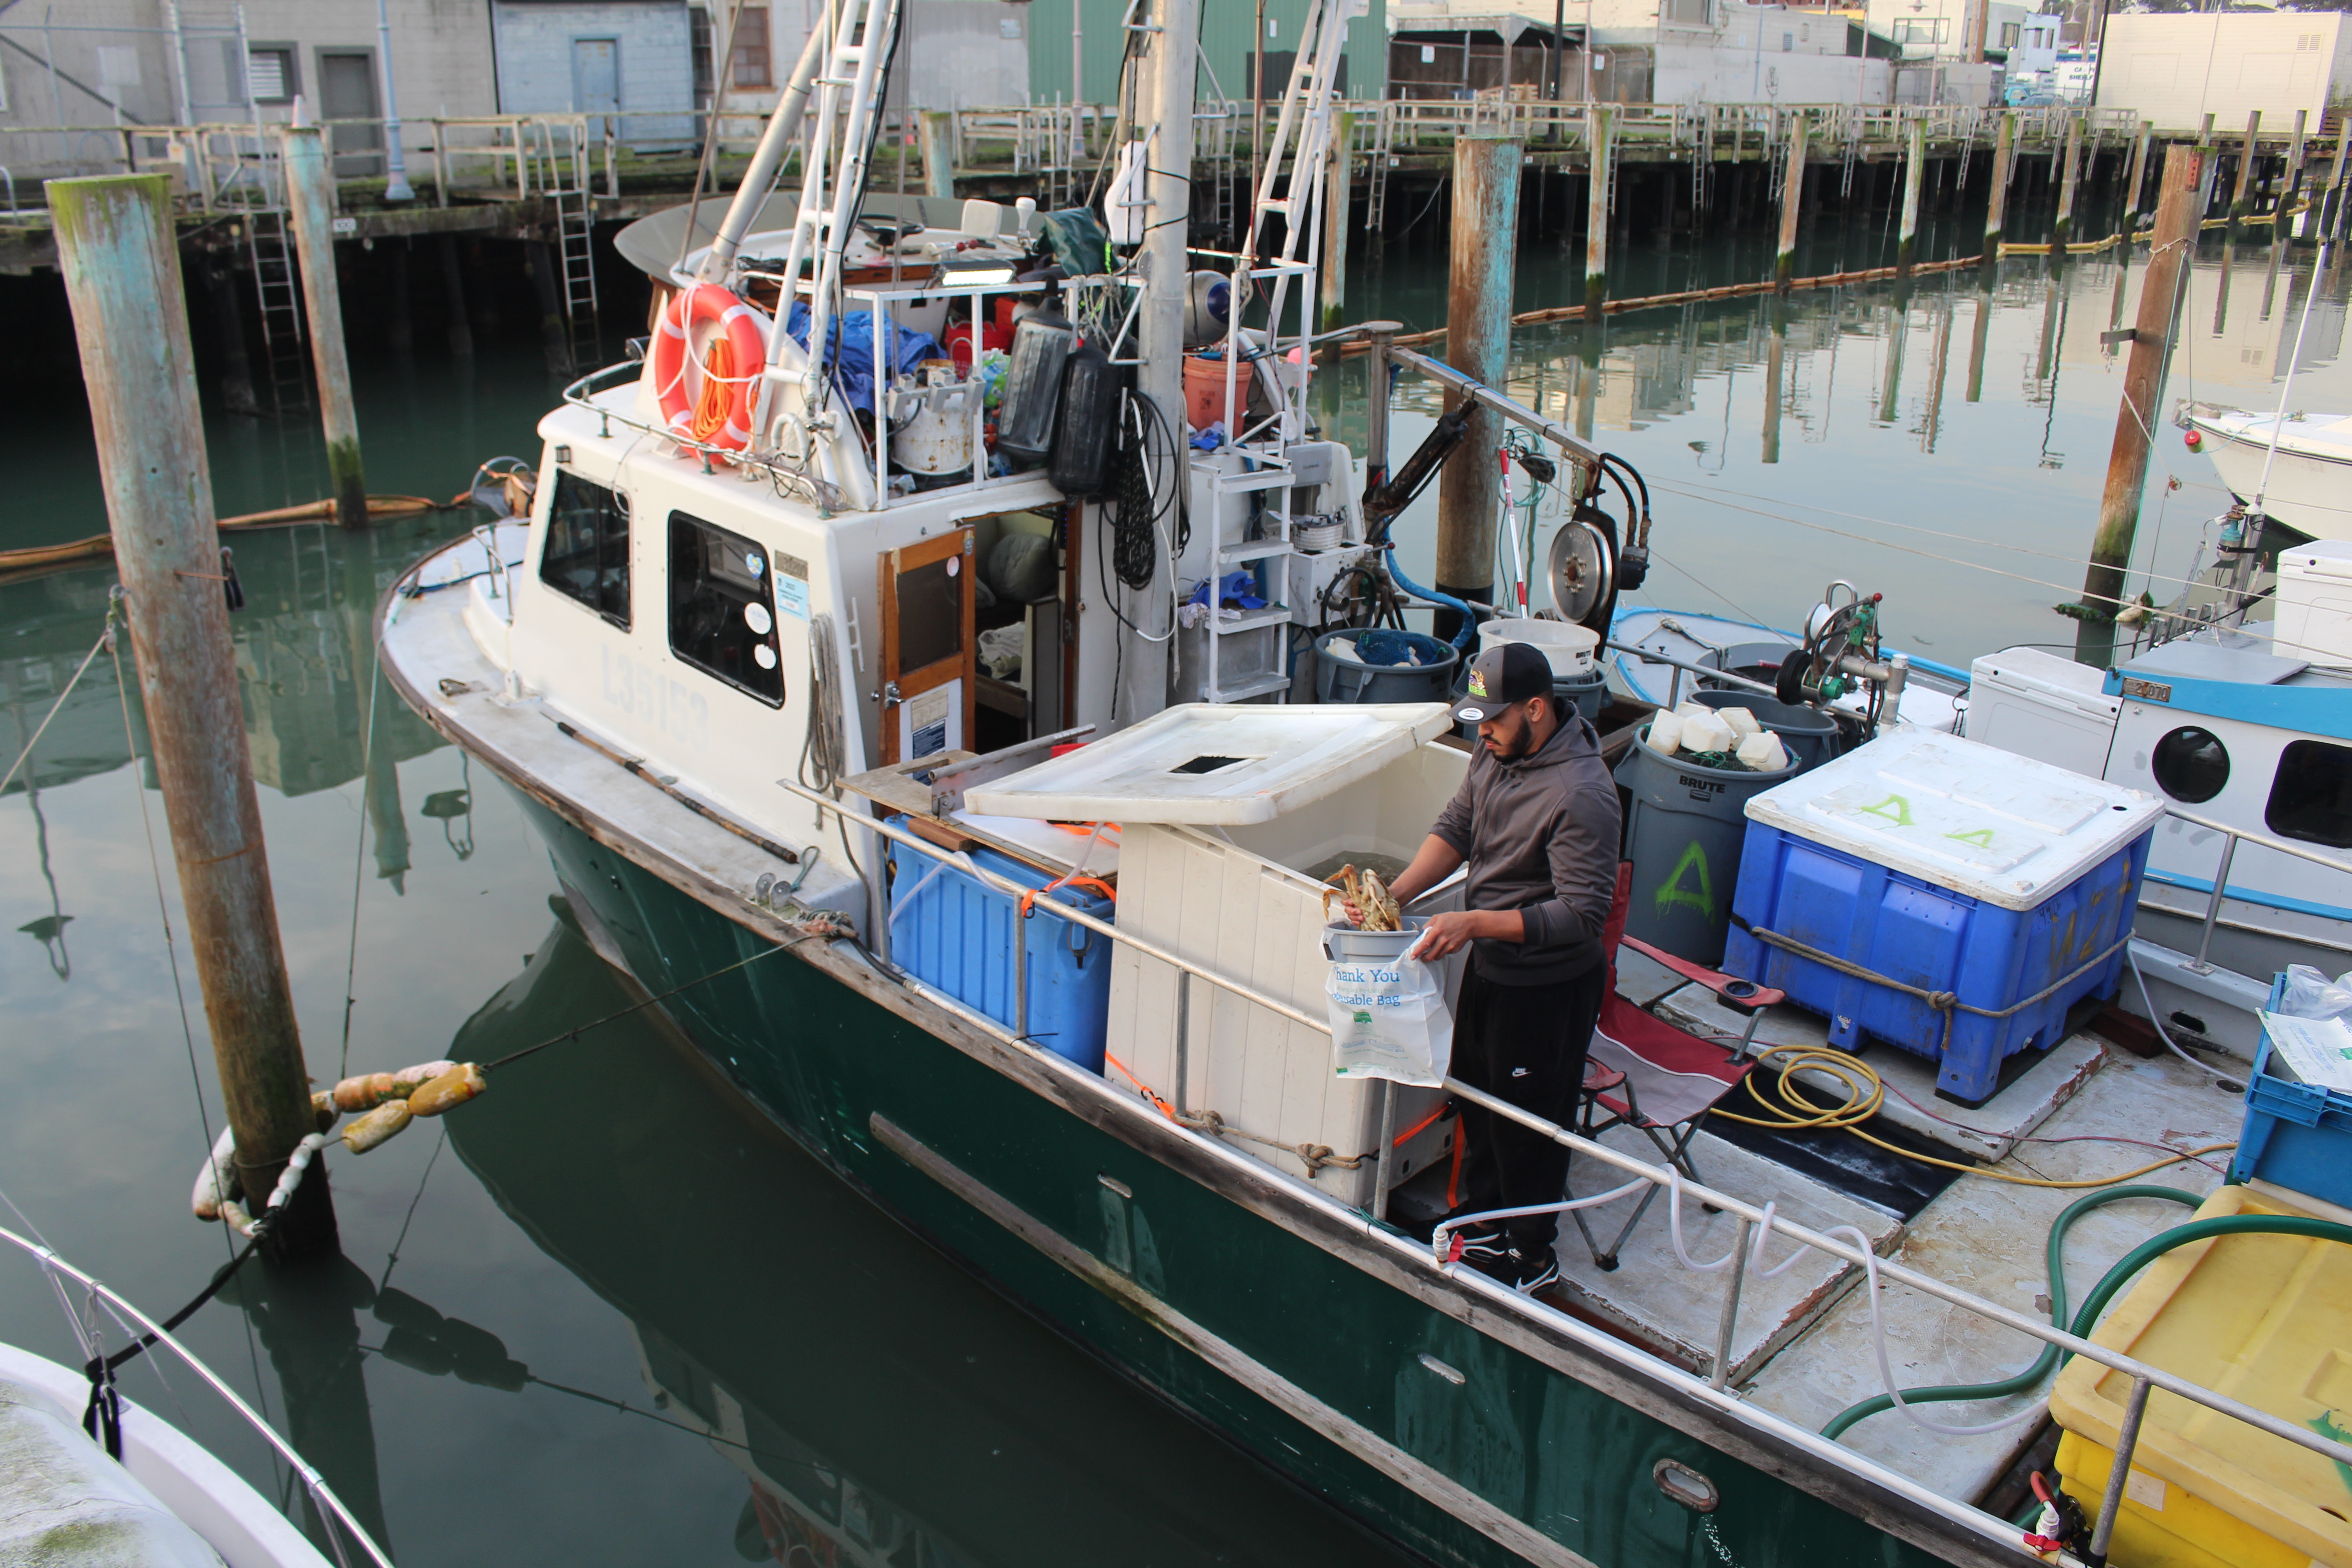 A commercial fishing boat.